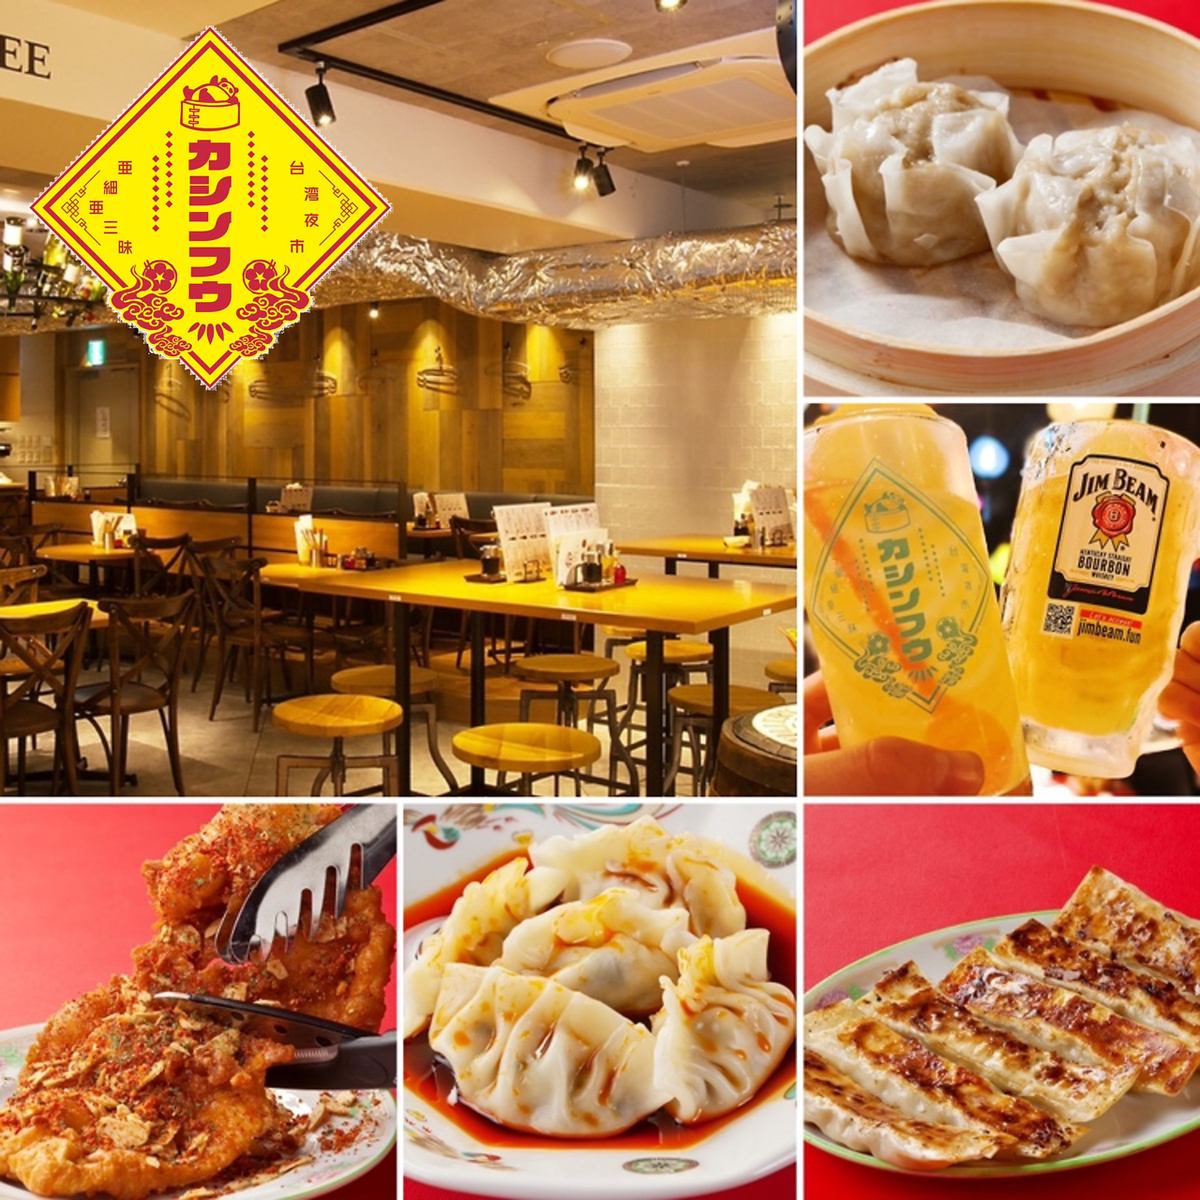 Enjoy authentic Chinese cuisine and Chinese bar menu along with a wide variety of alcoholic drinks.